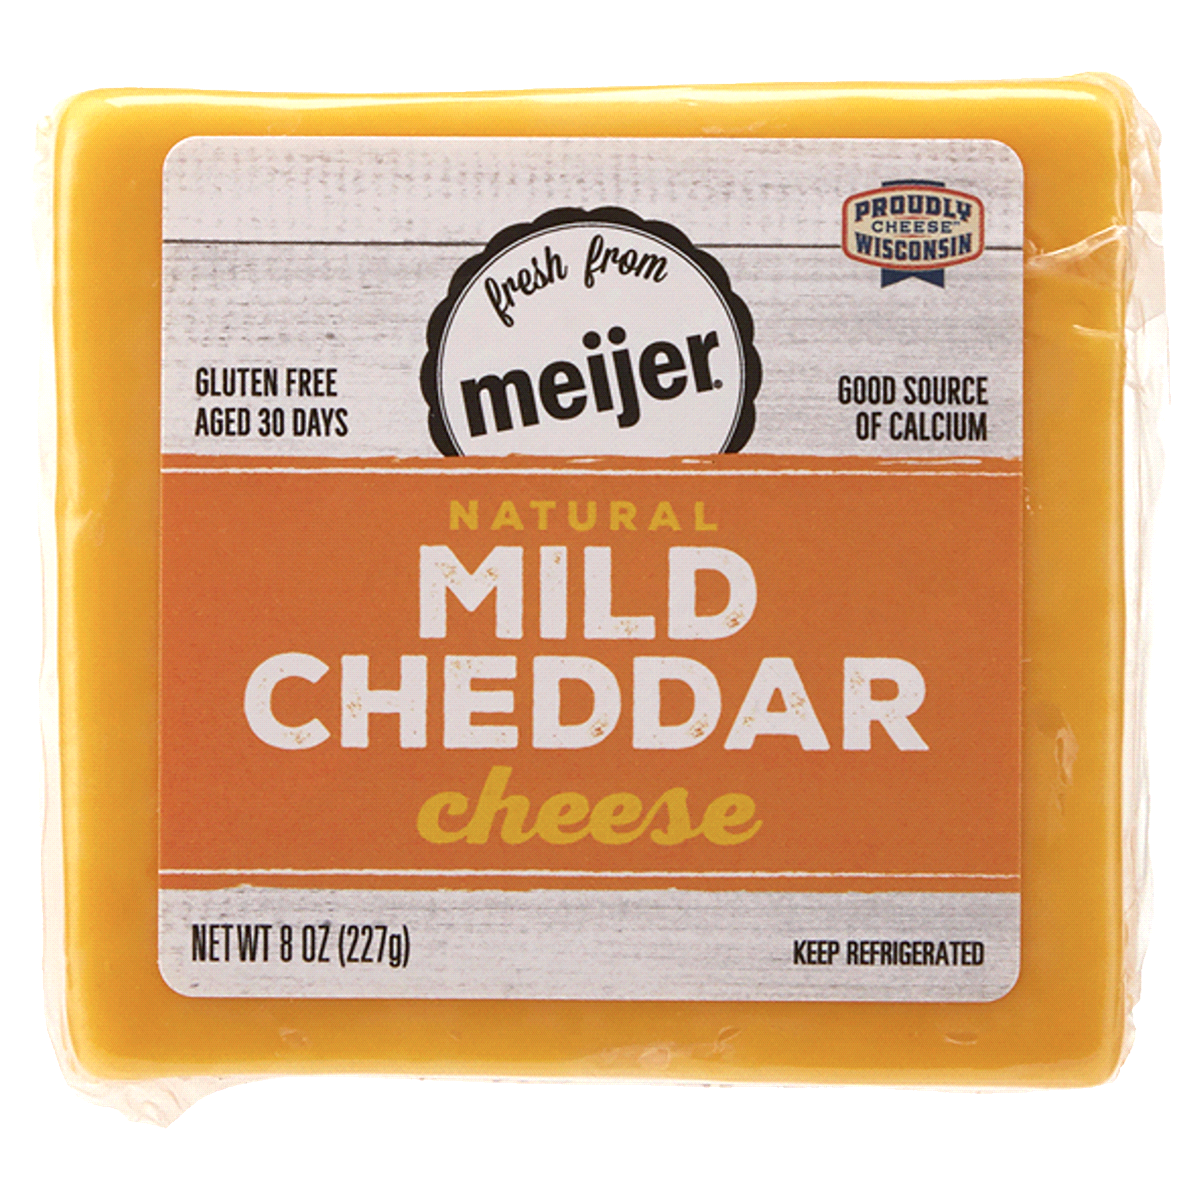 slide 1 of 5, Fresh from Meijer Natural Mild Cheddar Cheese, 8 oz